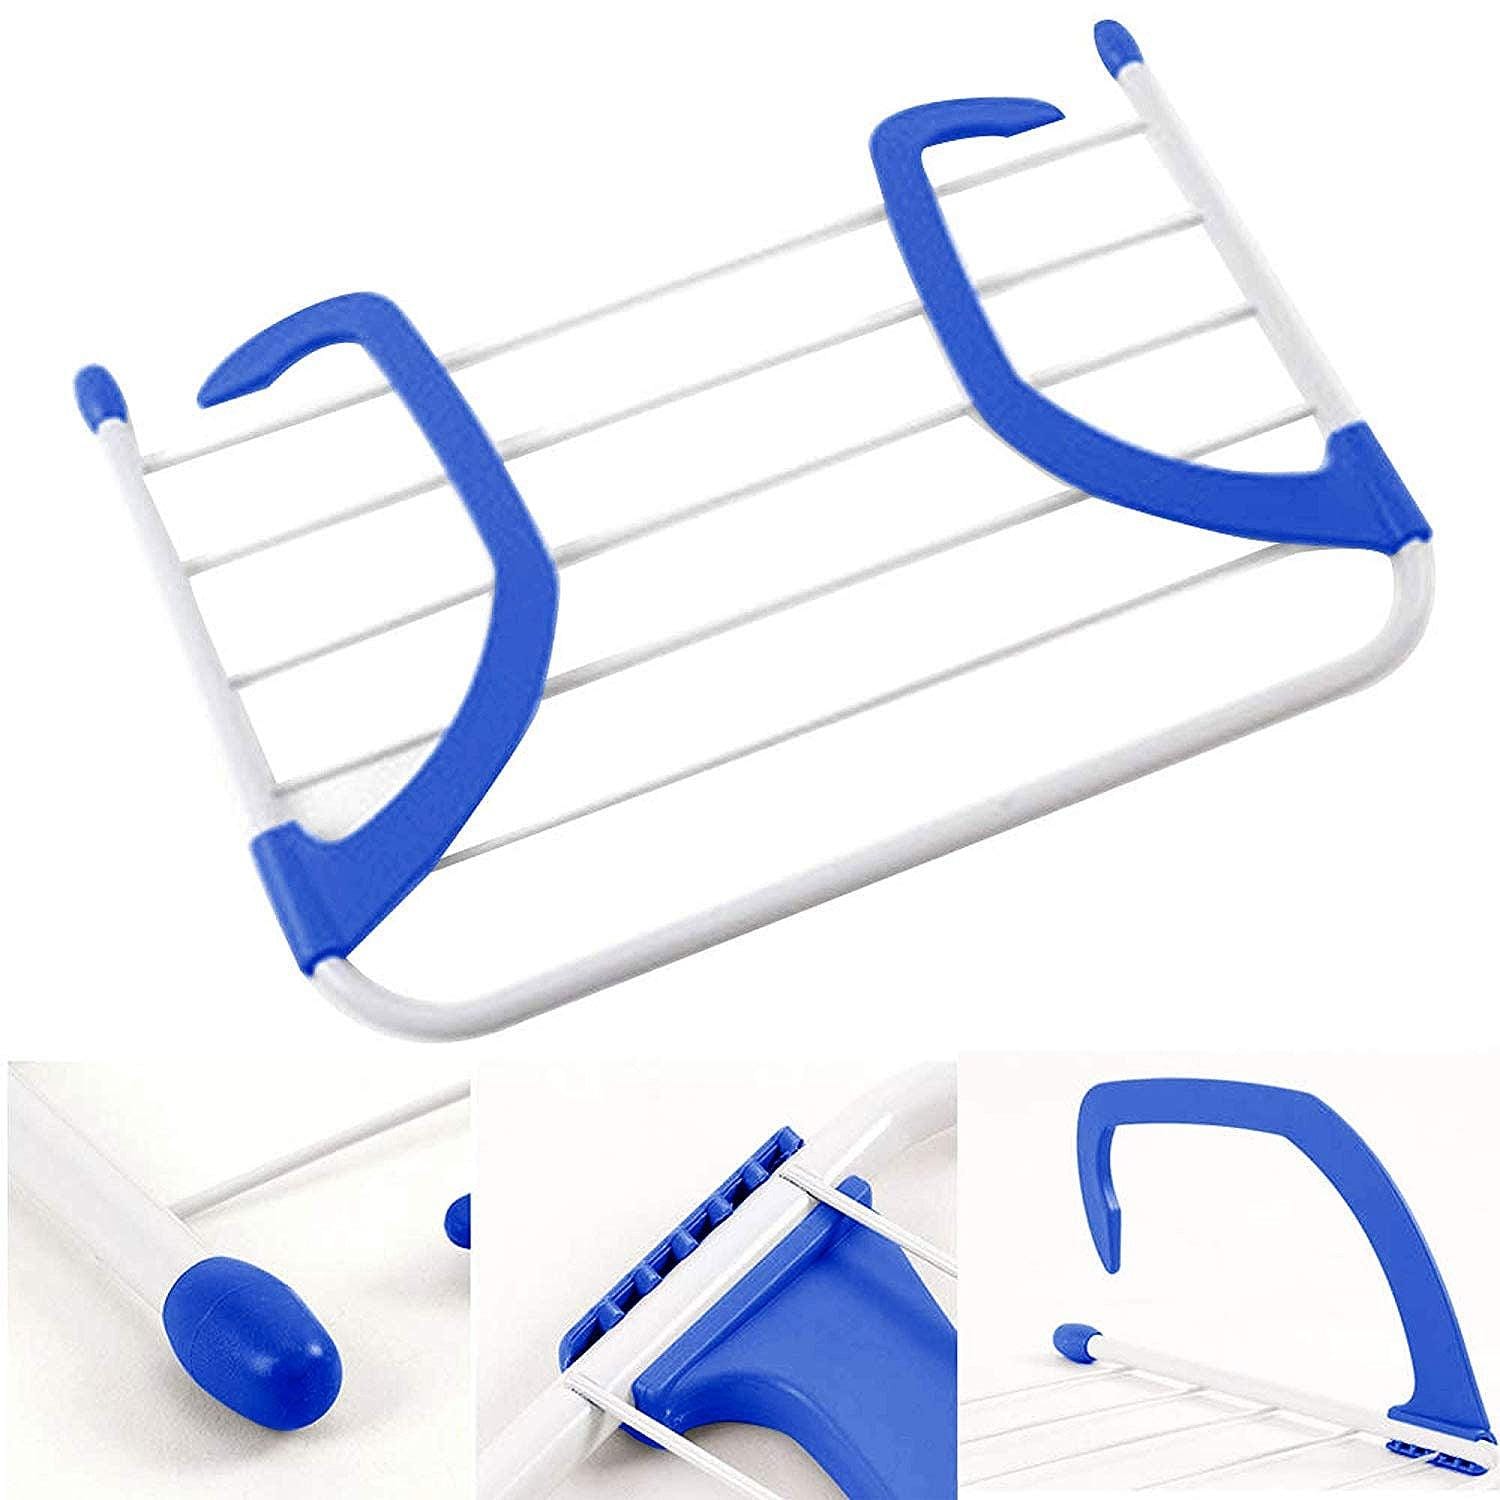 Portable Folding Metal Clothes Drying Rack with 5 Clothes Line (Blue) (3 Kilo Capacity)